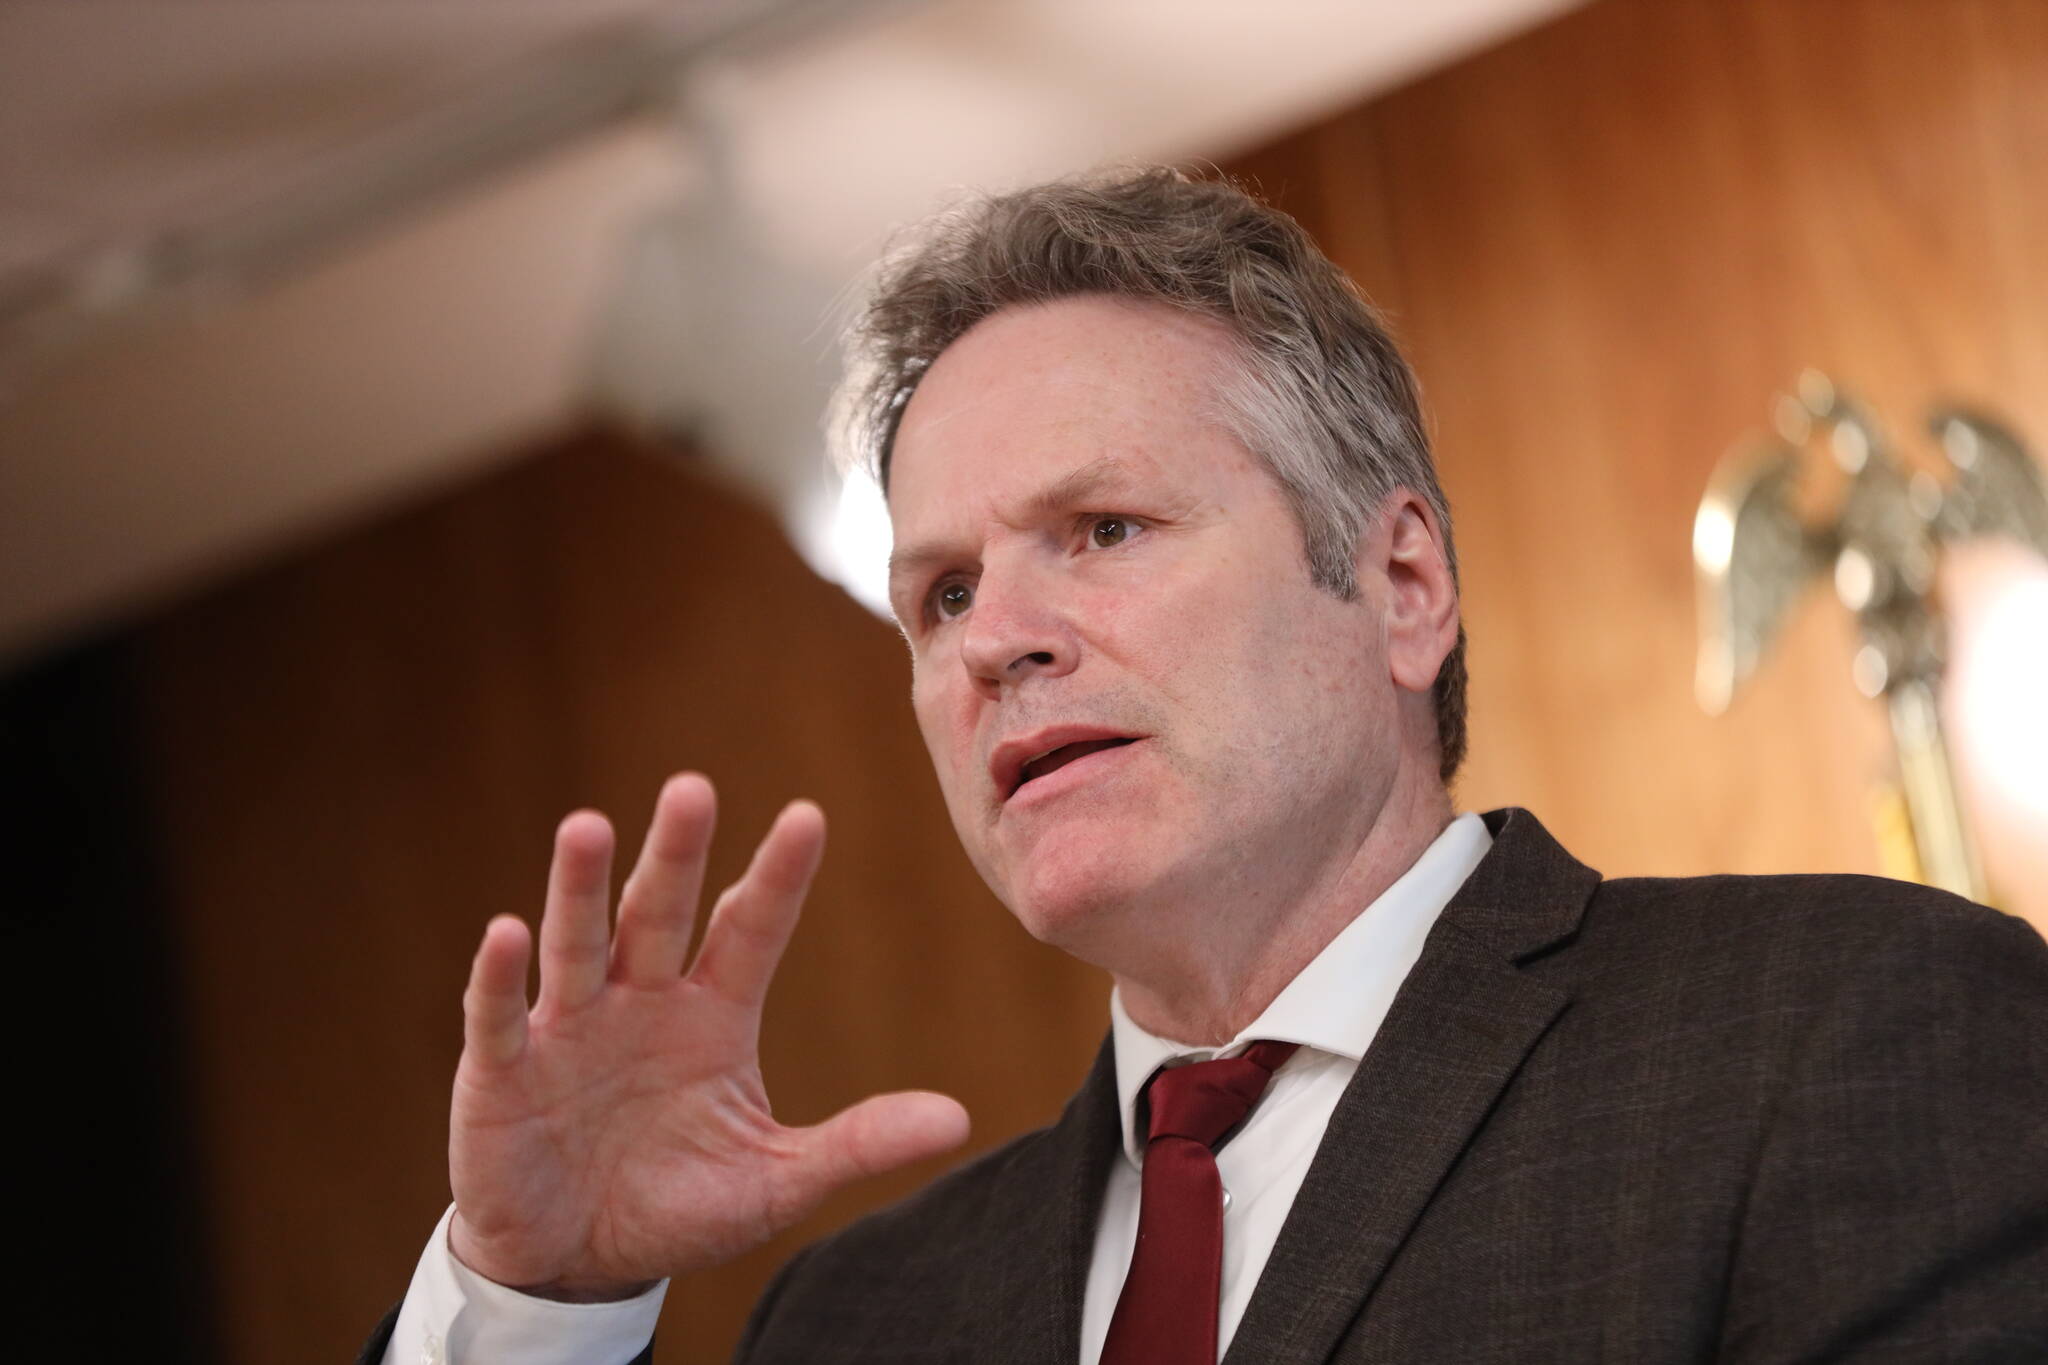 Gov. Mike Dunleavy speaks during a news conference in which options for a long-range fiscal plan were discussed. Dunleavy said in the coming days, he expects a sales tax proposal to be drafted and that a special session to create long-term plan is possible. (Clarise Larson / Juneau Empire)